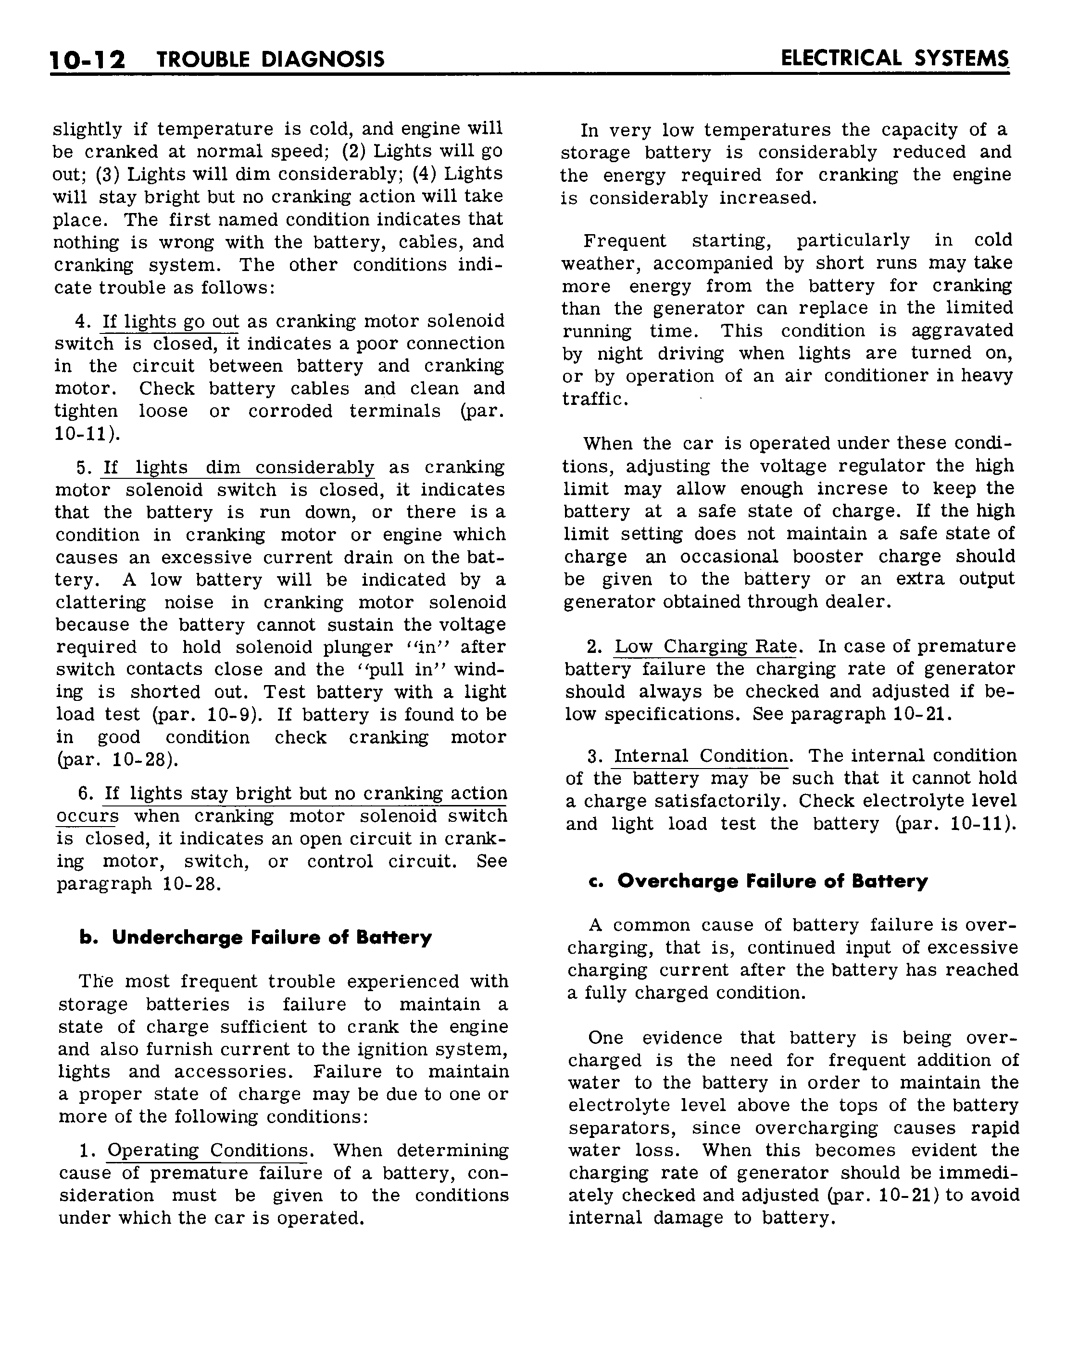 n_10 1961 Buick Shop Manual - Electrical Systems-012-012.jpg